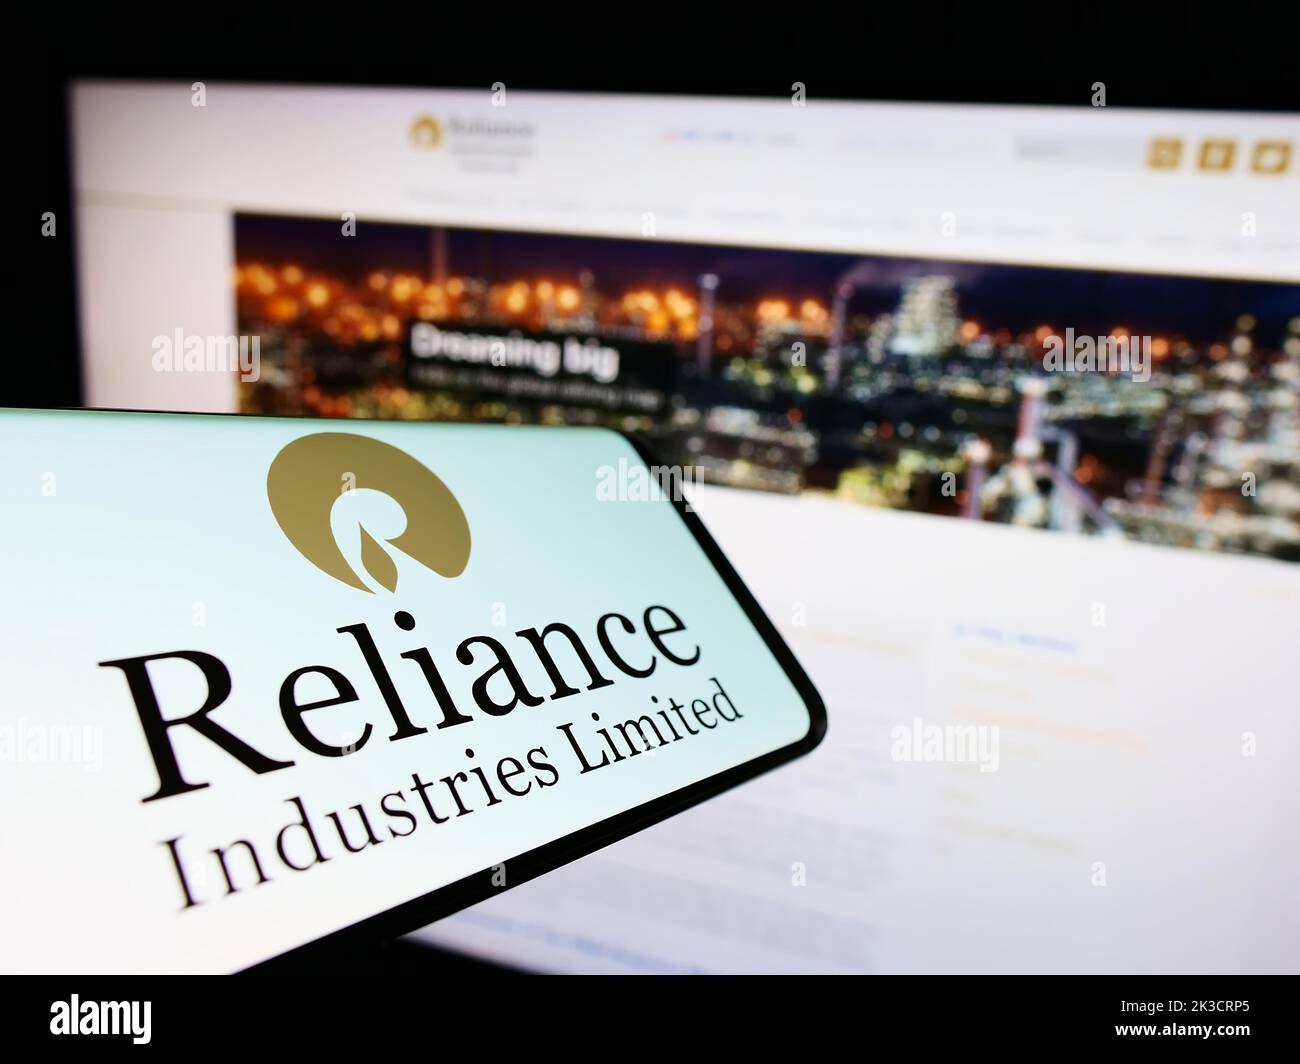 Mobile phone with logo of Indian company Reliance Industries Limited on screen in front of website. Focus on center-right of phone display. Stock Photo